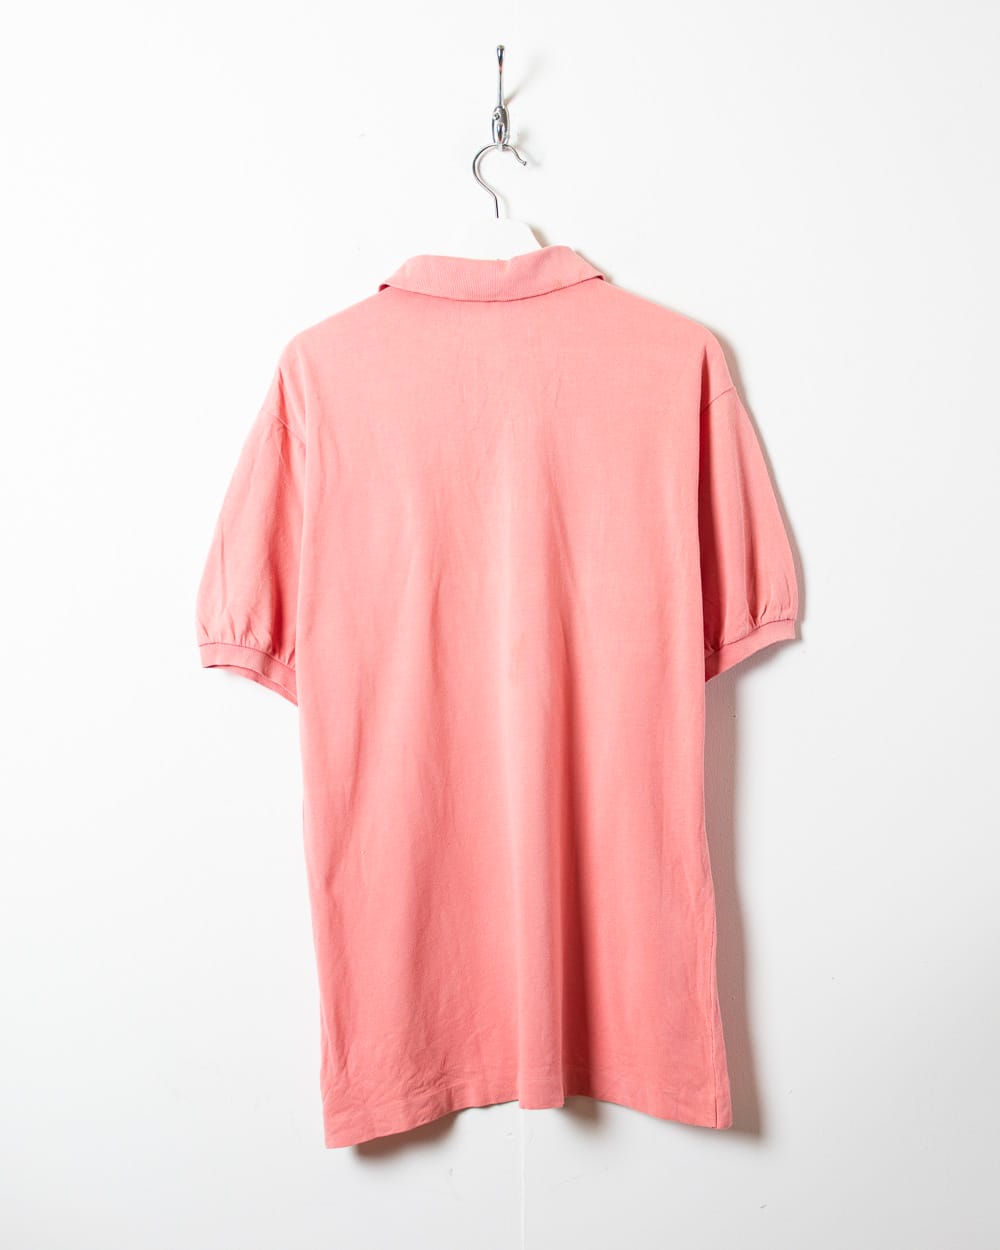 Pink Chemise Lacoste Polo Shirt - X-Large